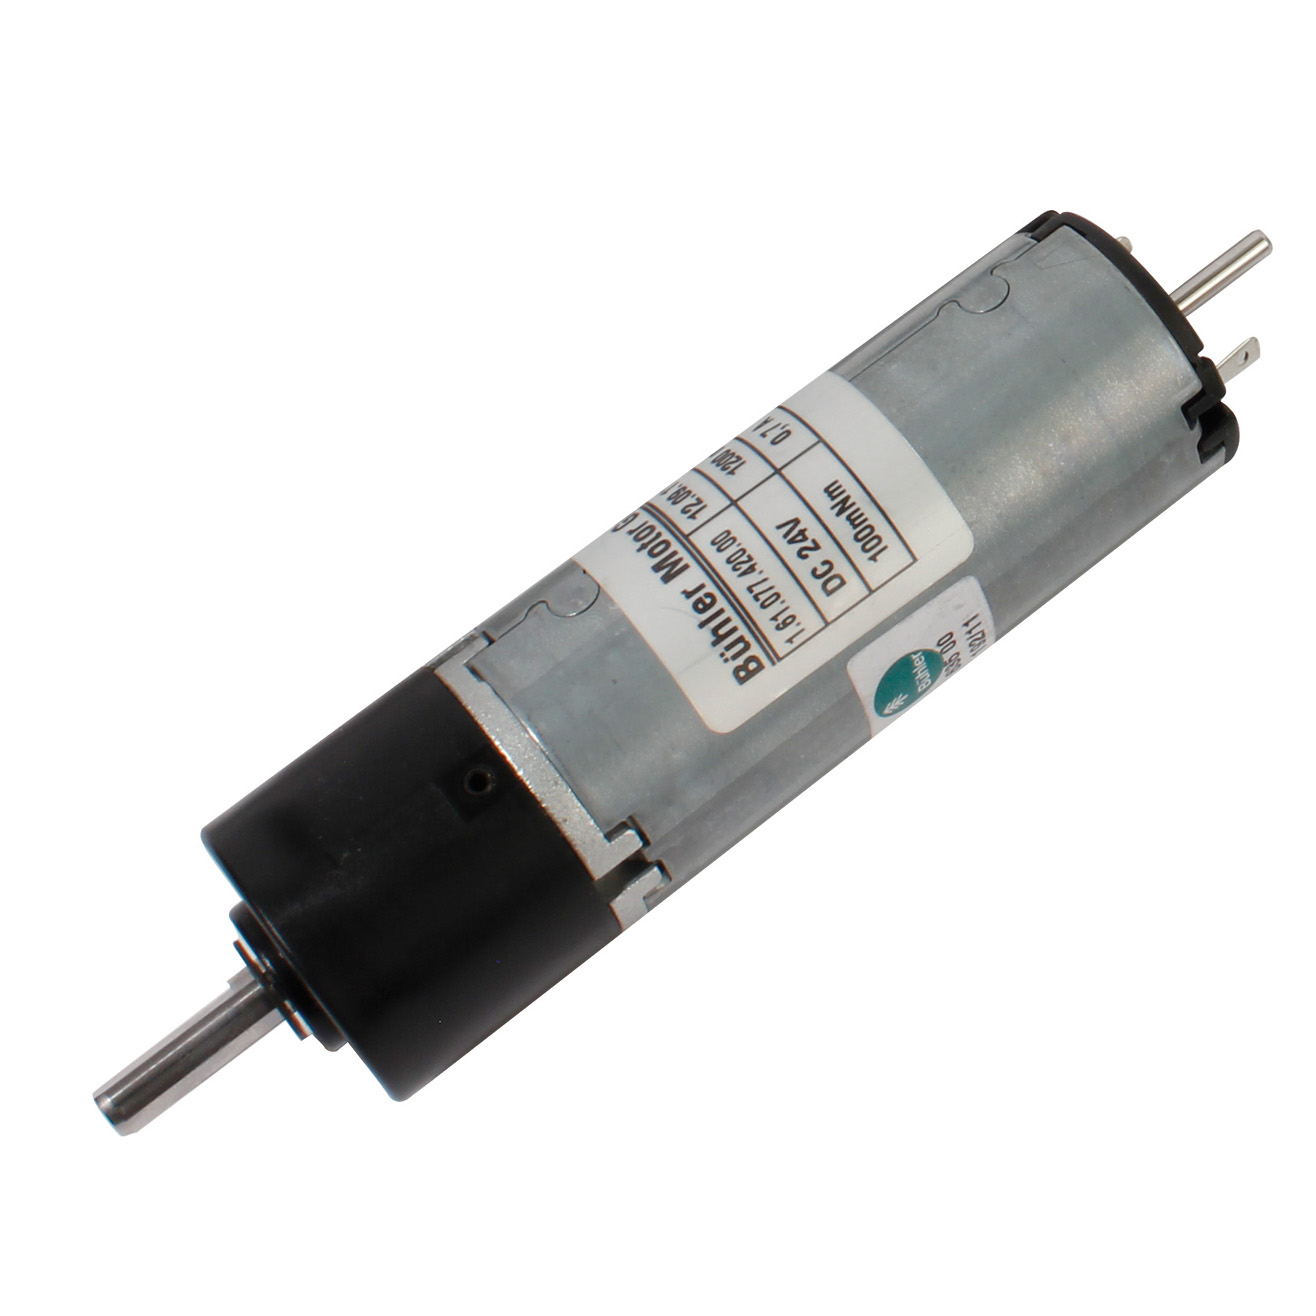 Motor-gearbox 12V and 24V DC - from 0.1 to 2 Nm - 12 V DC - 